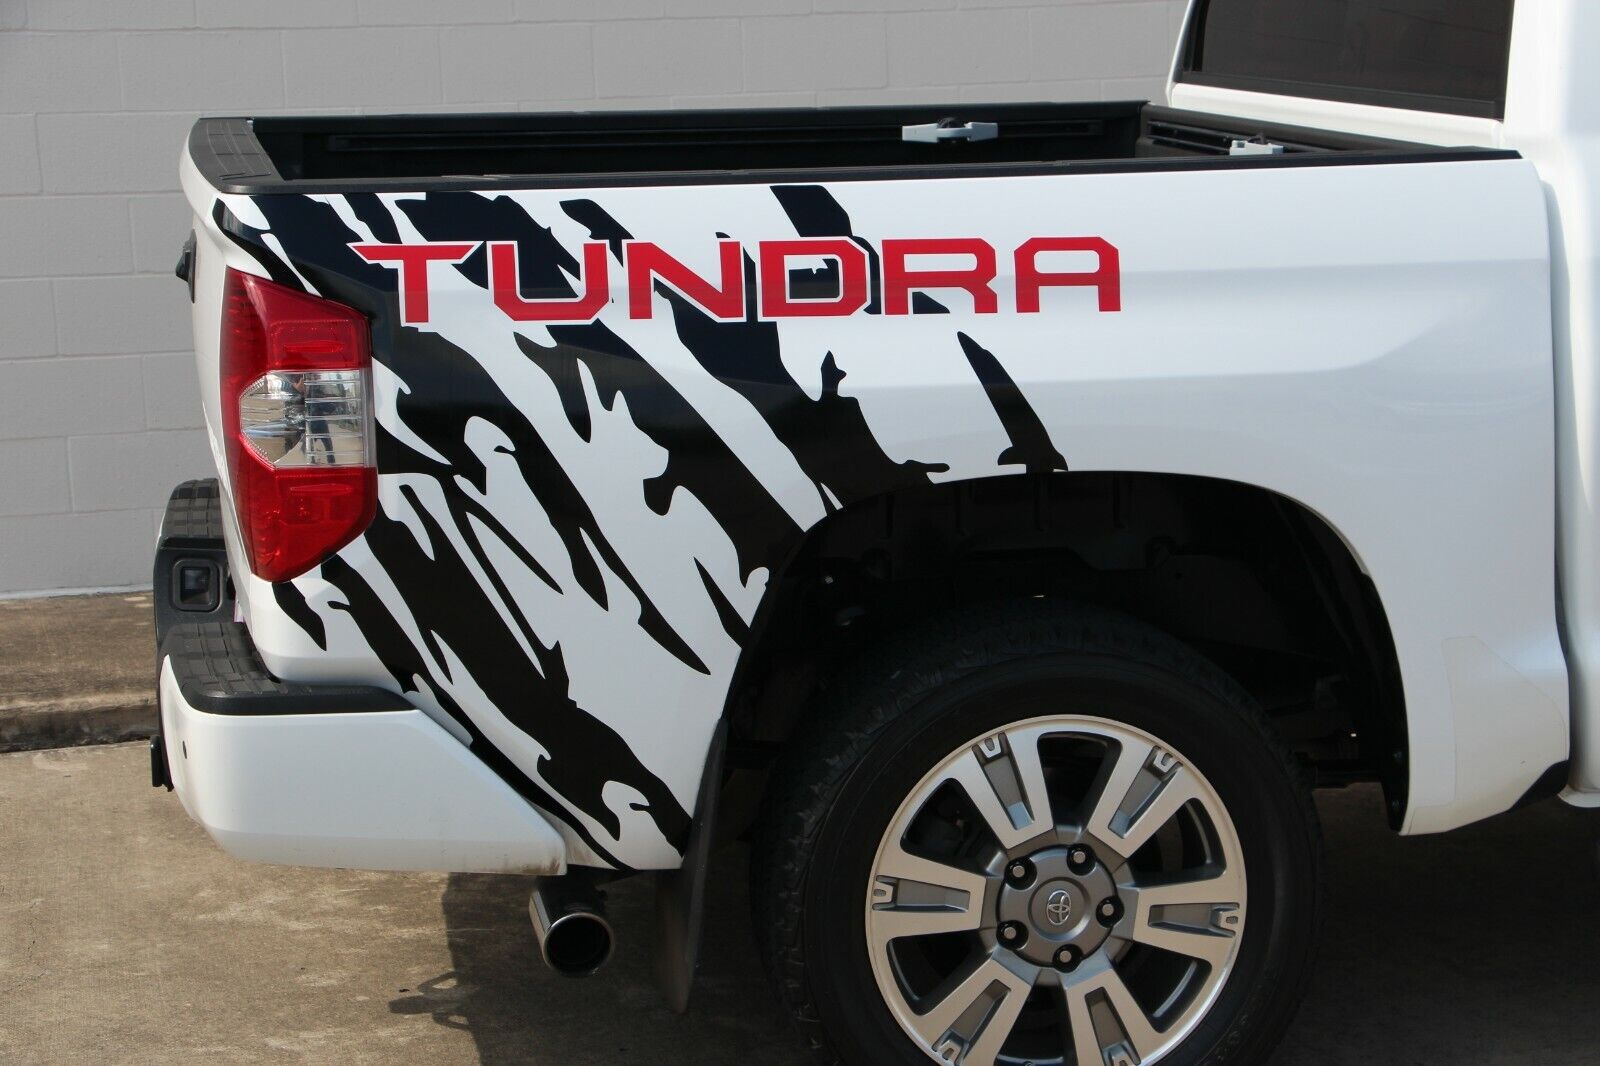 MUD splash side graphic decal for Toyota Tundra rear bed - ANY COLORS